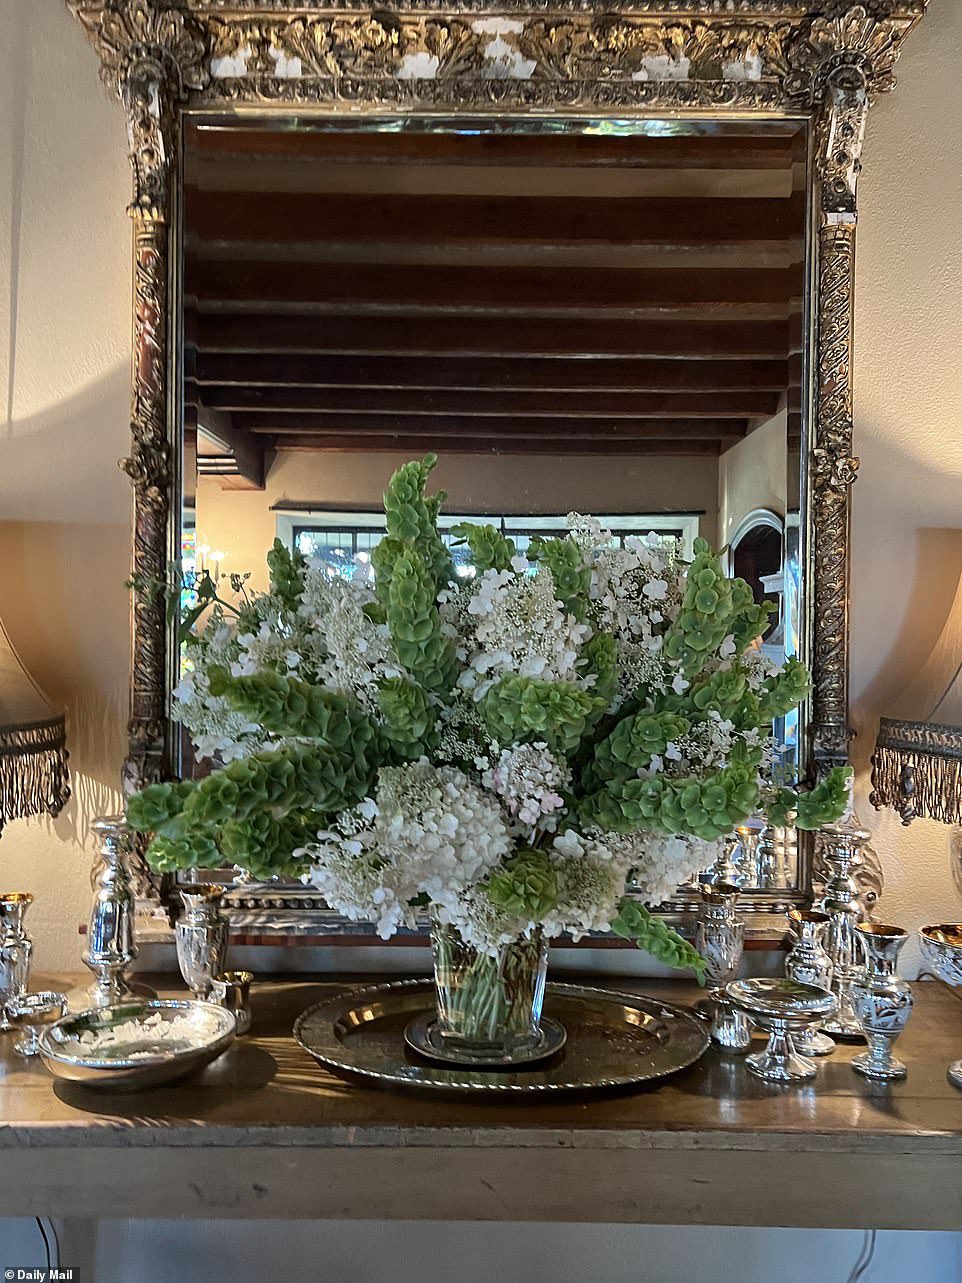 The success factor: the floral arrangements are laid out on intricate silver plates